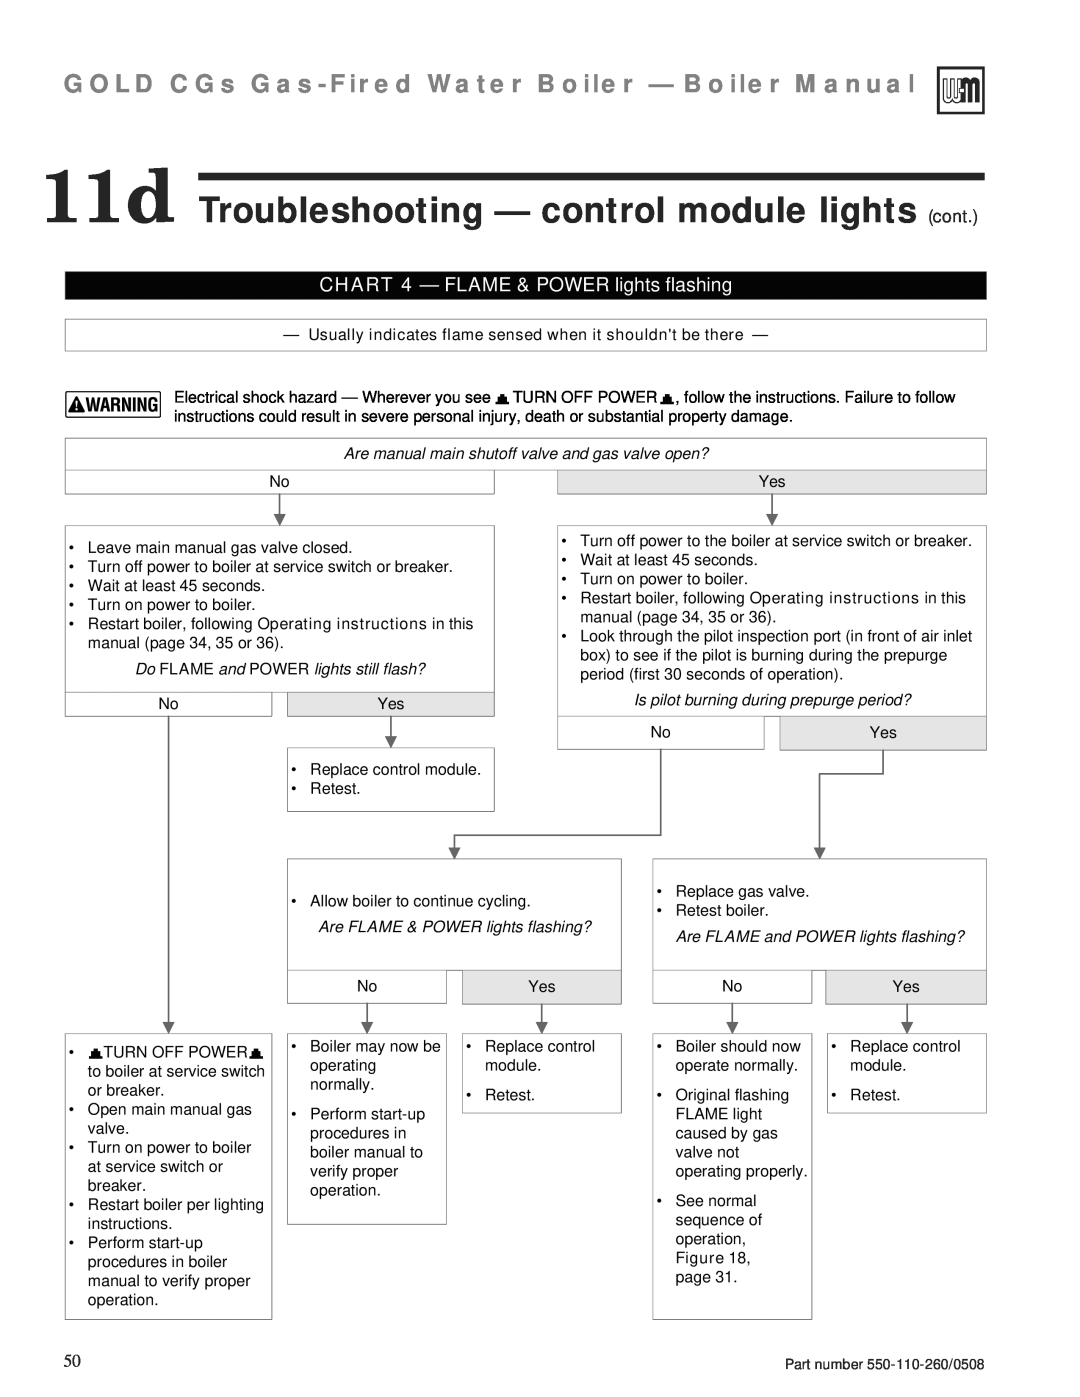 Weil-McLain 550-110-260/0508 11d Troubleshooting — control module lights cont, Do FLAME and POWER lights still flash? 